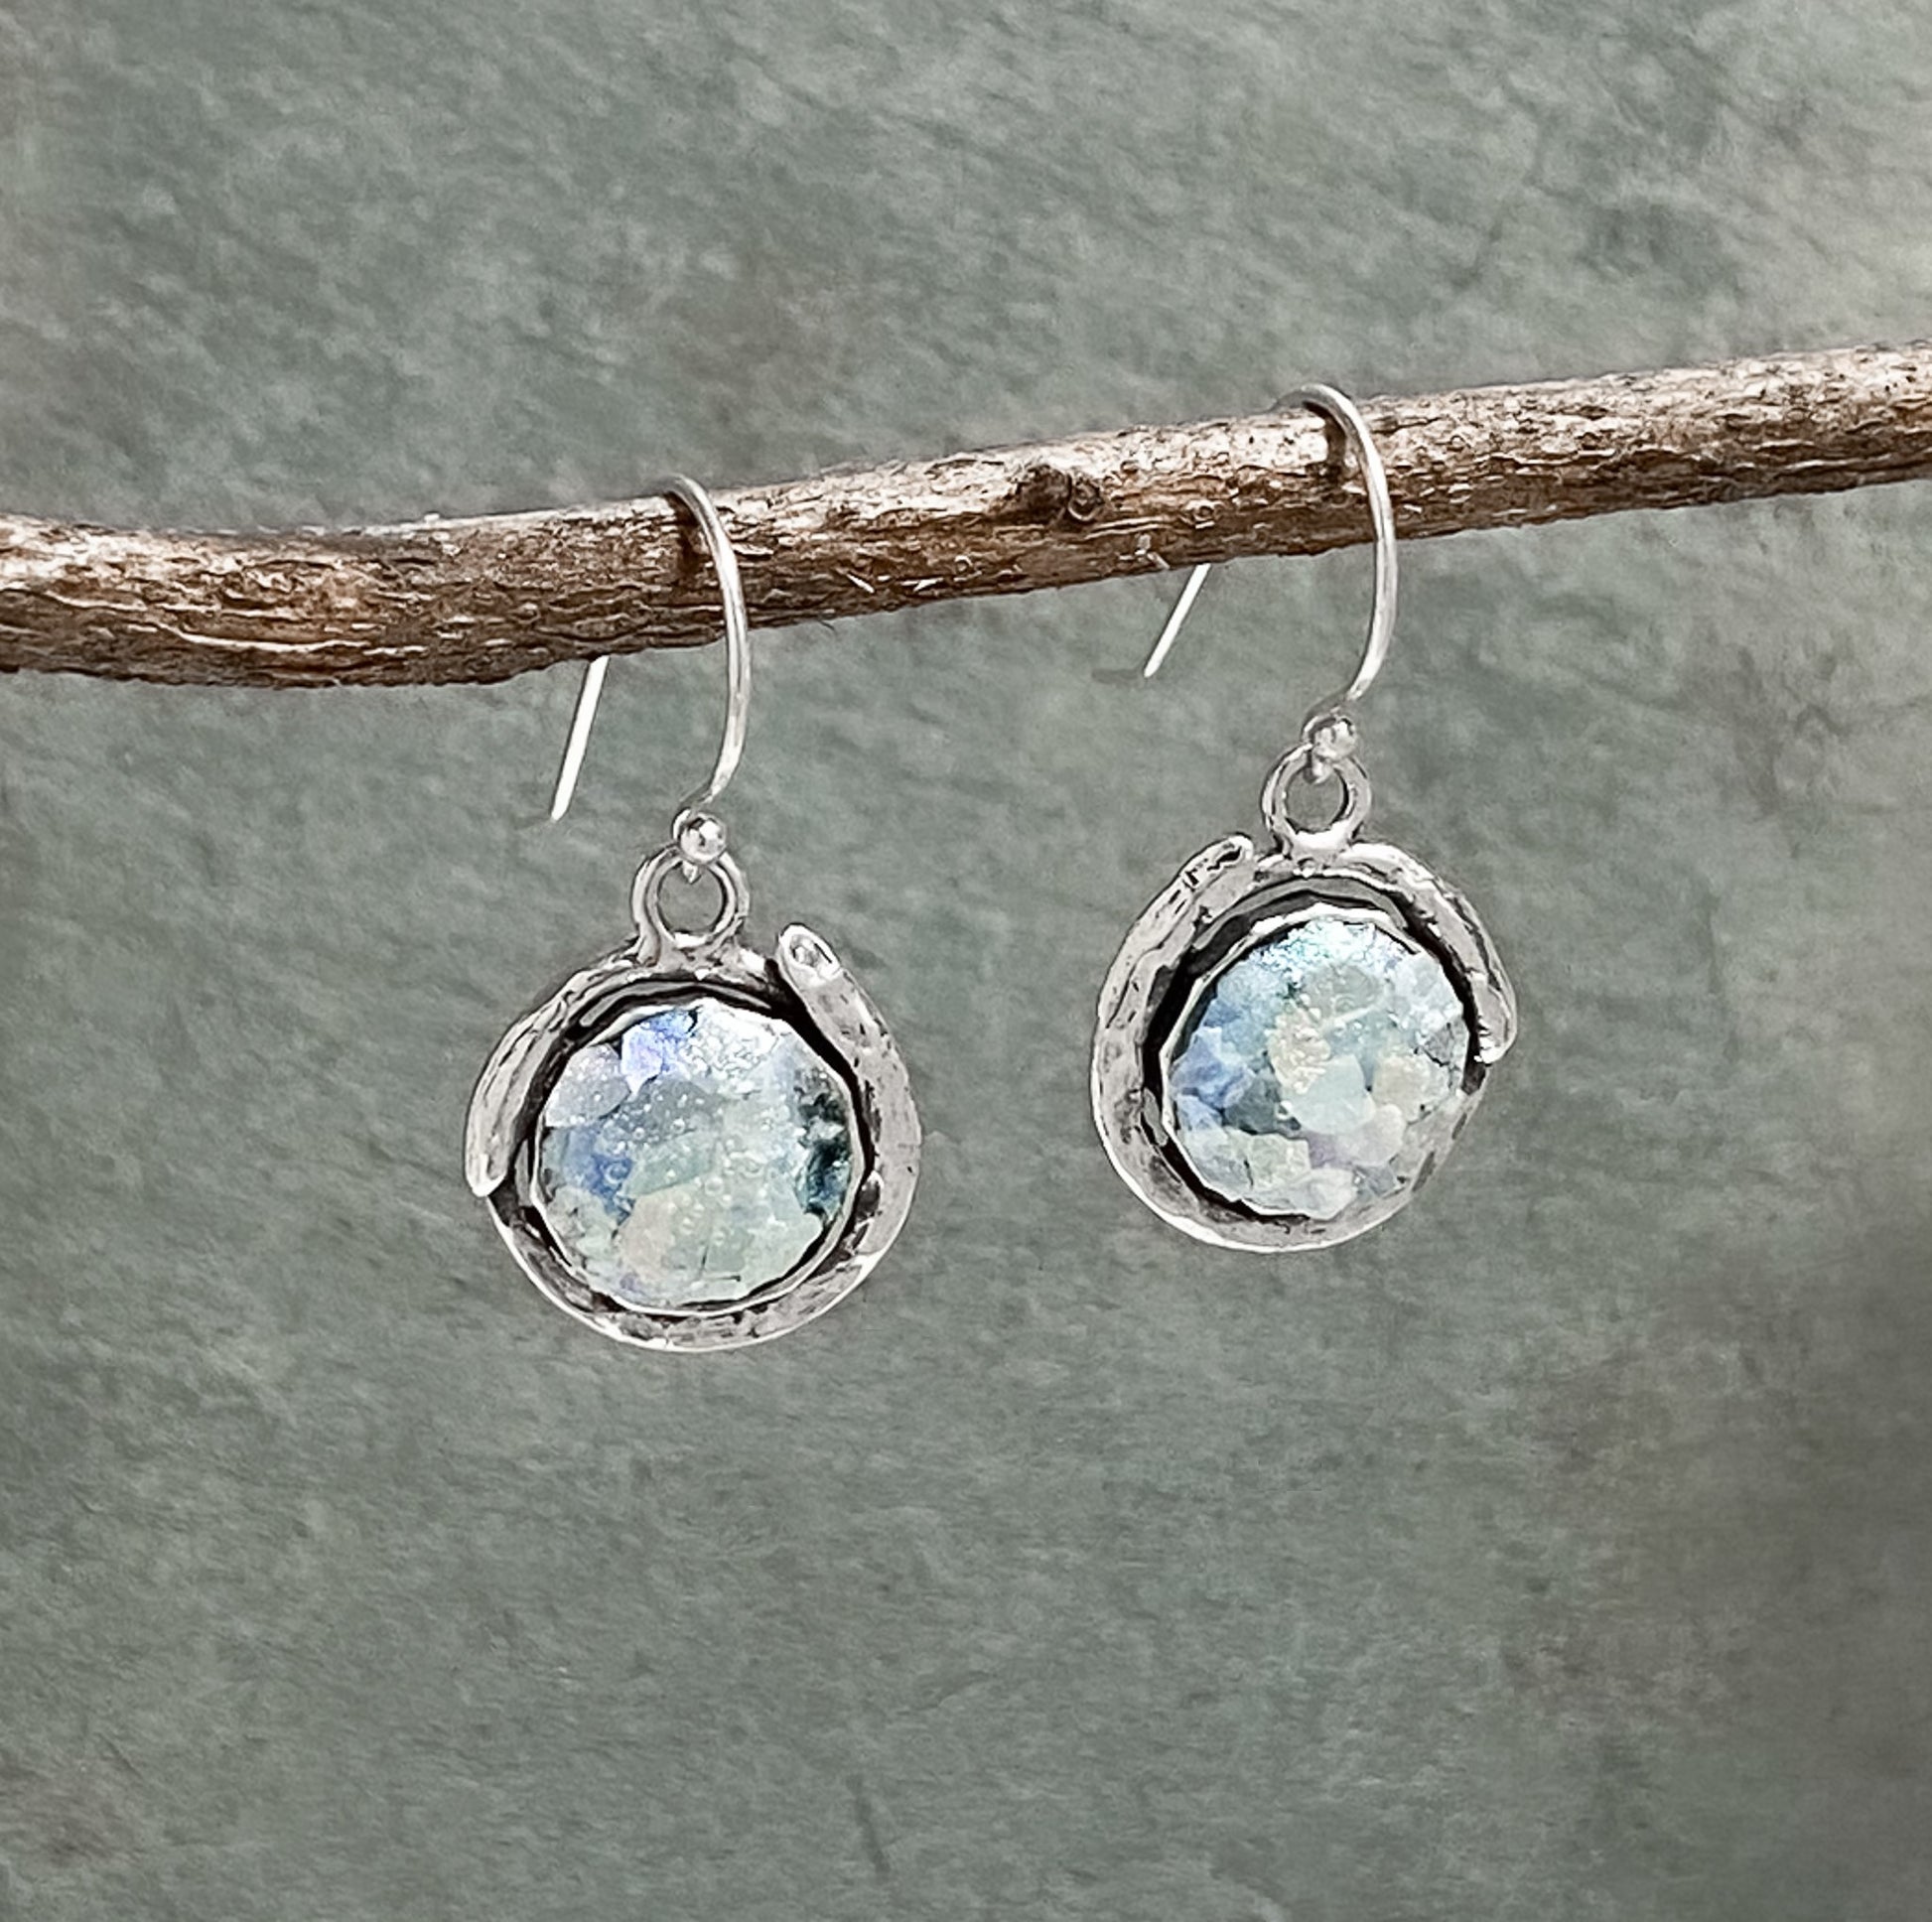 Sterling silver drop earrings with a Roman glass circle as the centerpiece. The glass is 2000 years old. 1.25" long including the wire. 